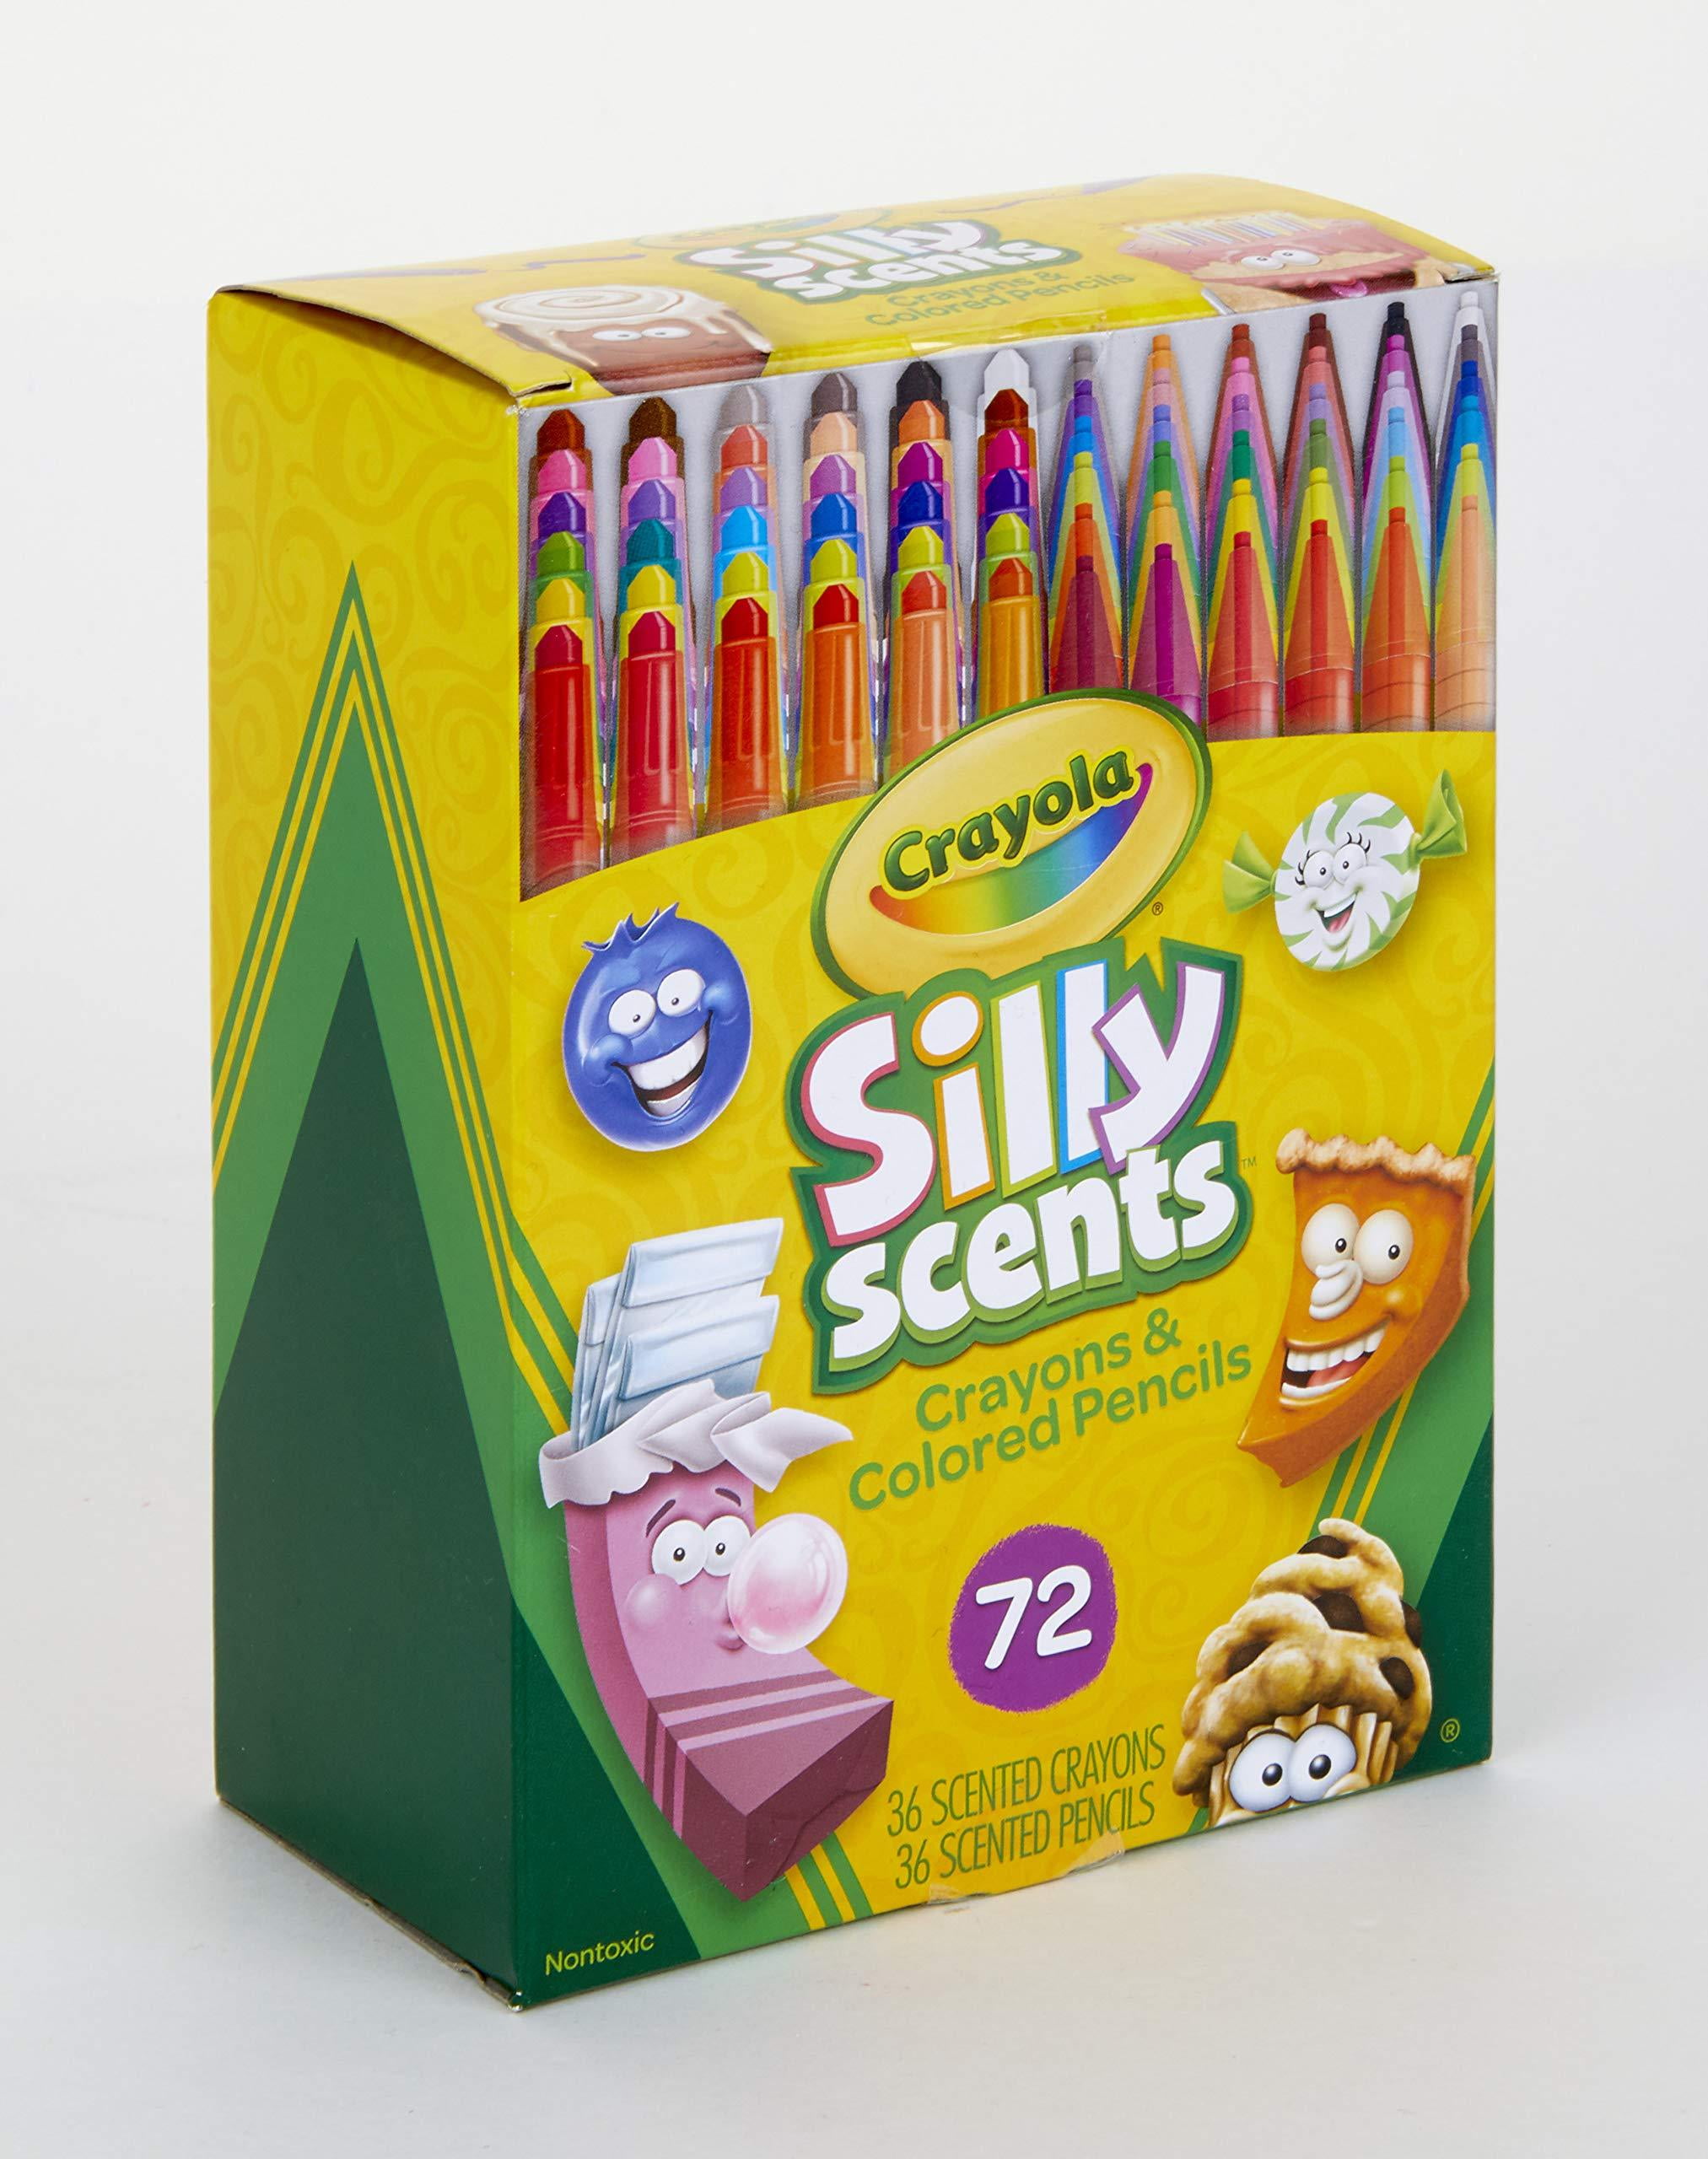  Crayola Silly Scents Twistables Crayons, Sweet Scented Crayons,  24 Count : Toys & Games